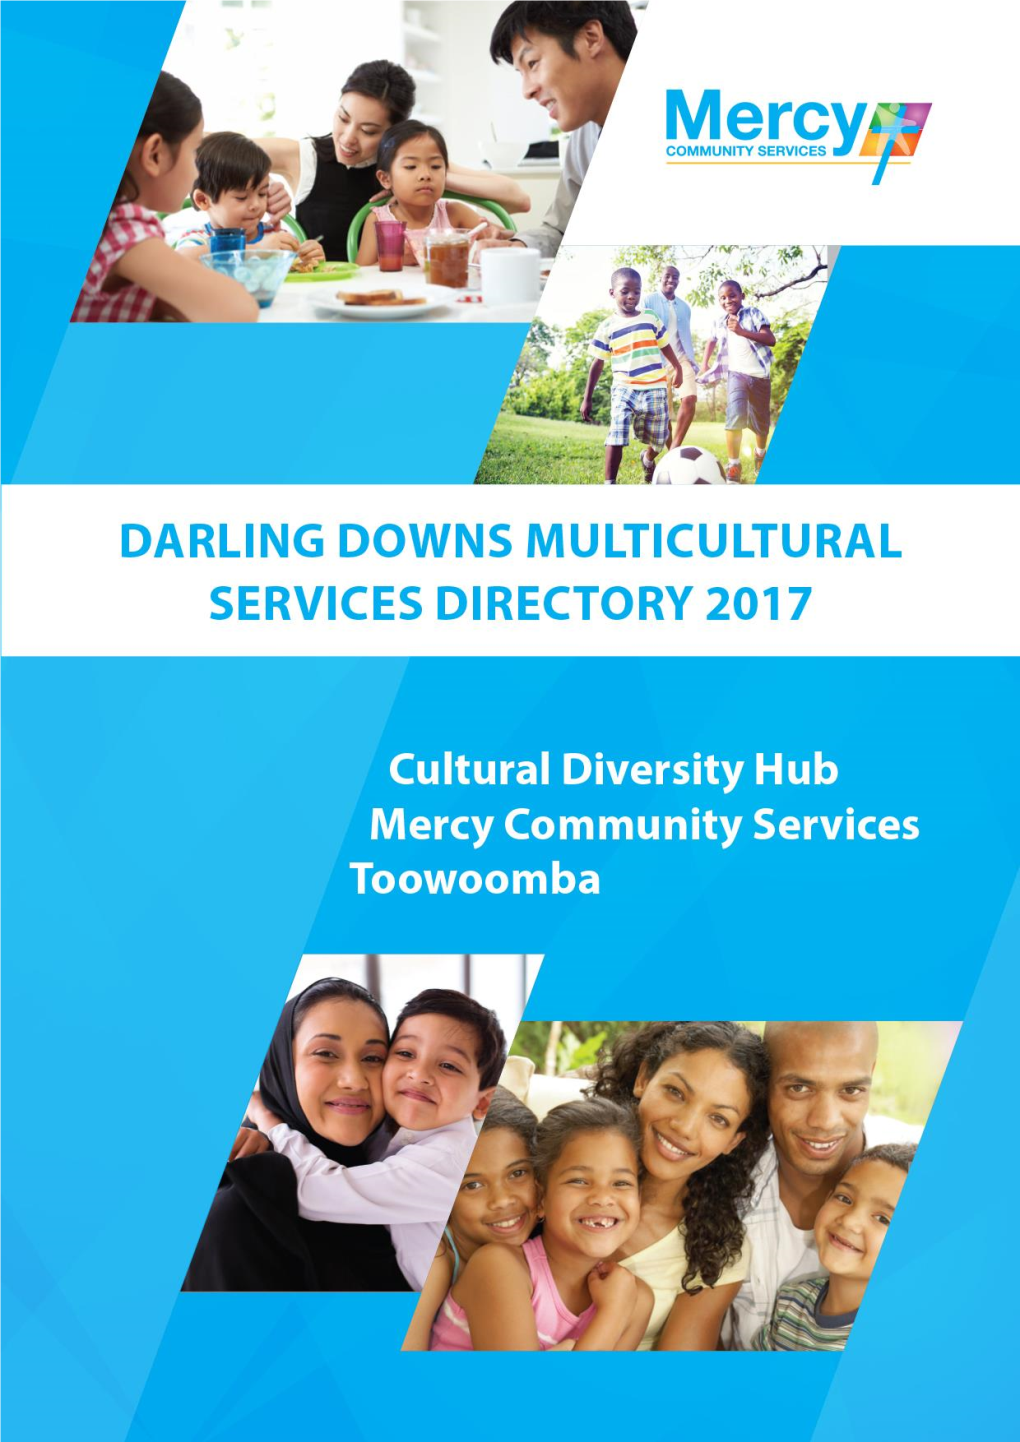 Darling Downs Multicultural Services Directory